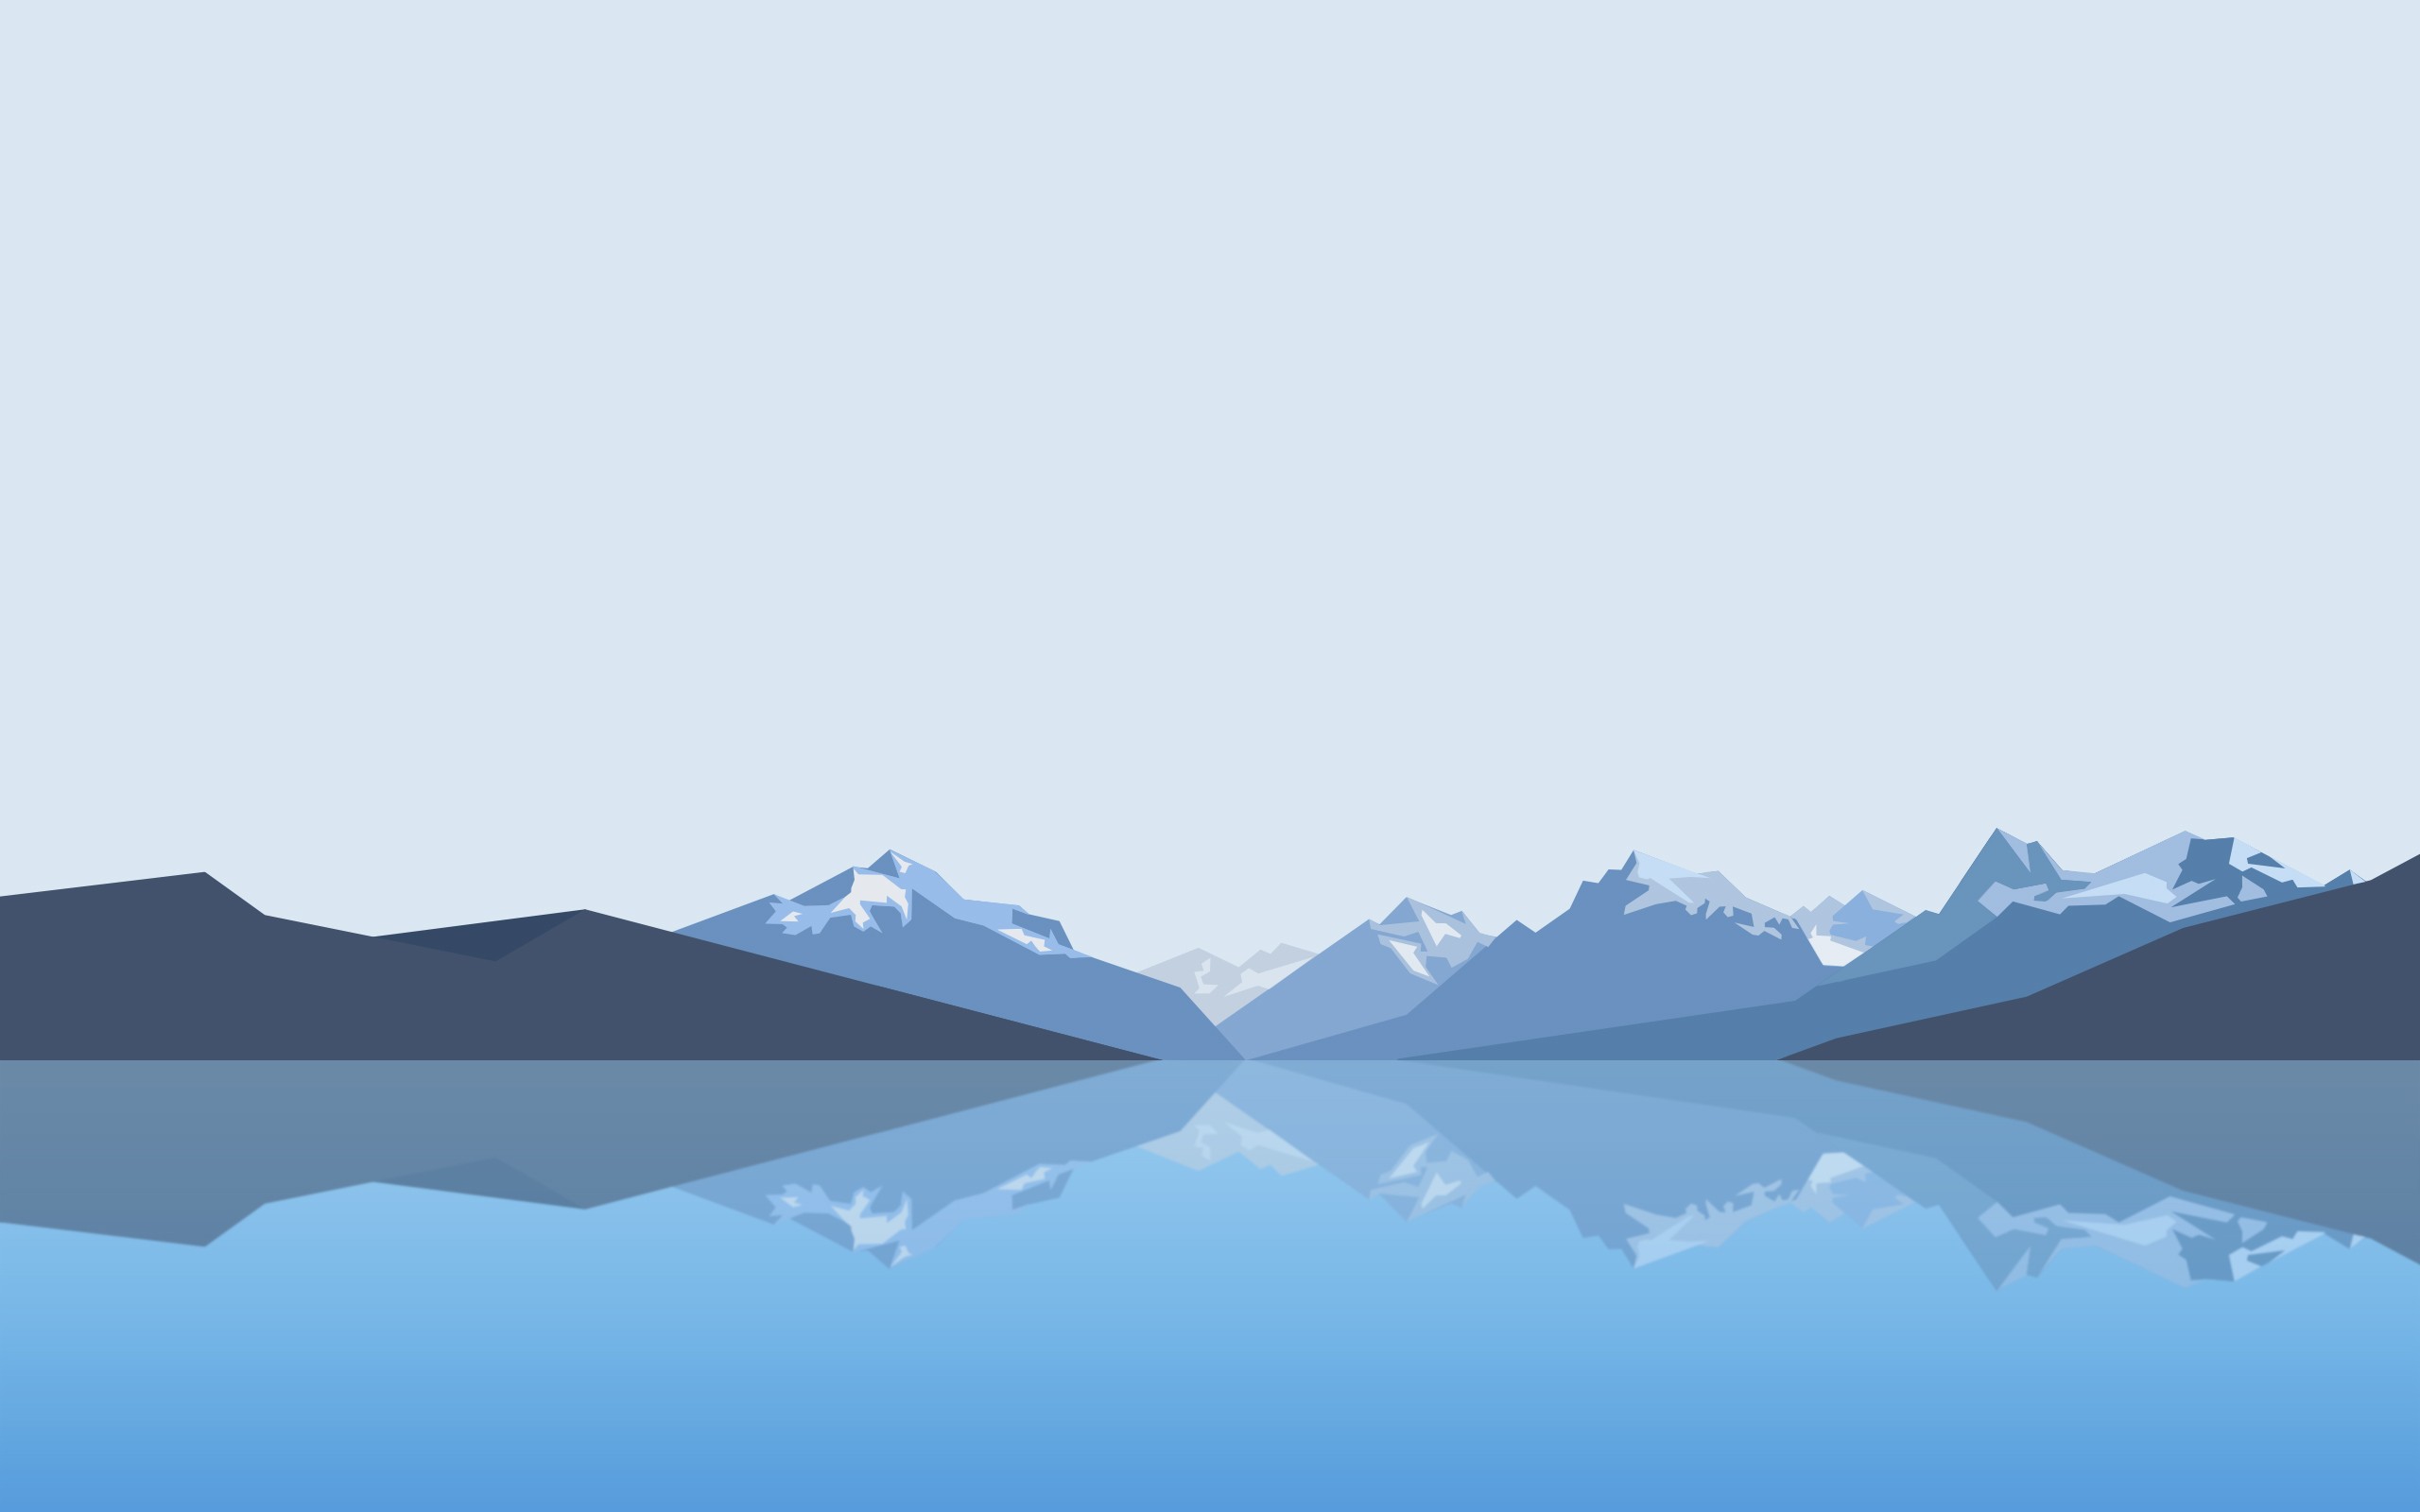 minimalism, Landscape, Mountains, Lake, Clear sky, Reflection, Low poly Wallpaper